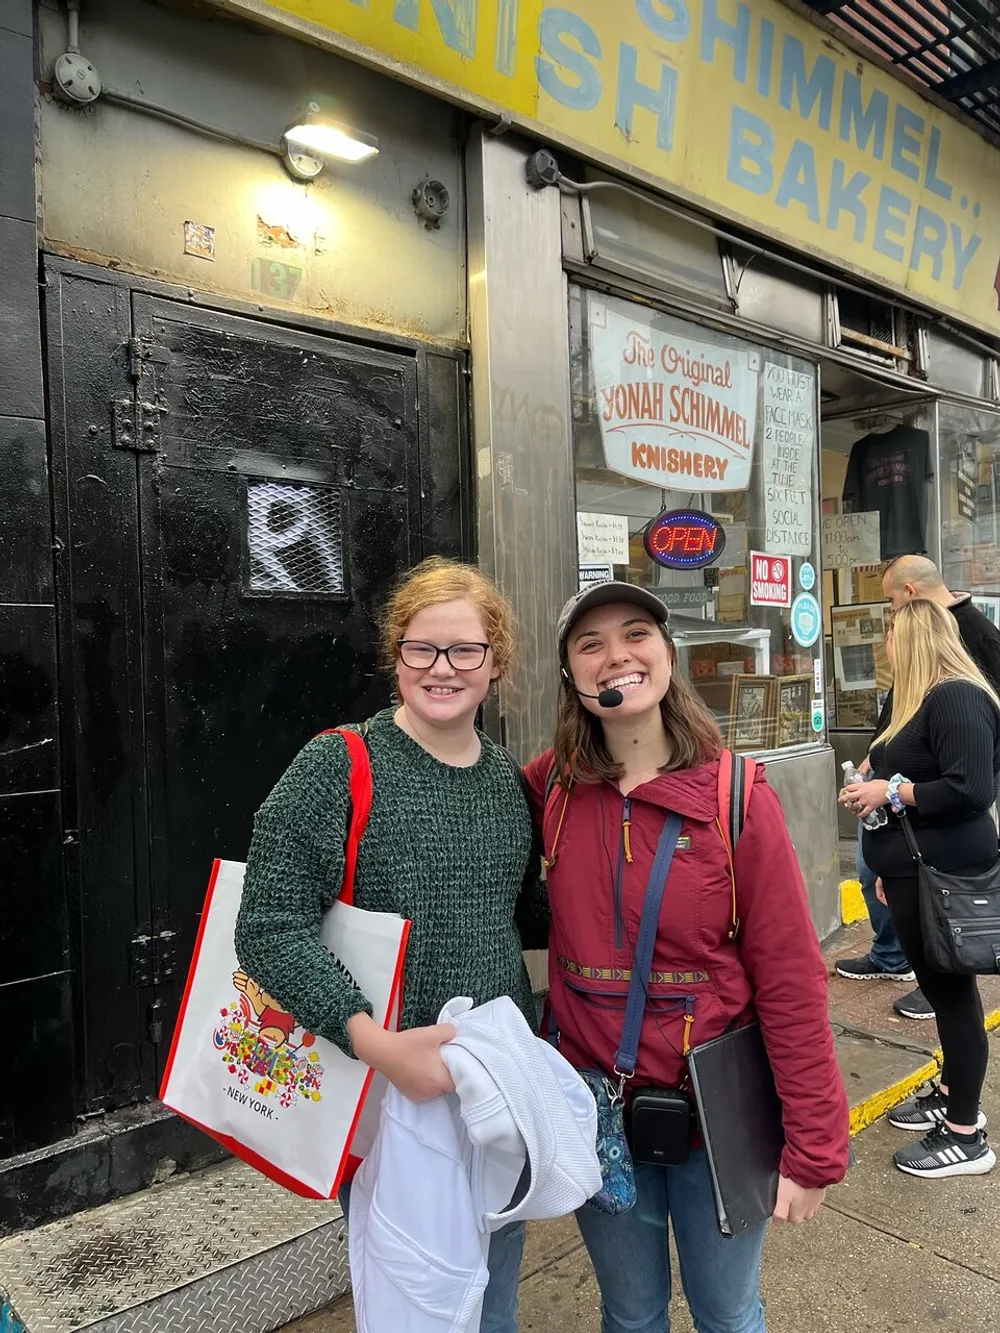 Two smiling young individuals are standing in front of the Yonah Schimmel Knish Bakery possibly after having visited the shop